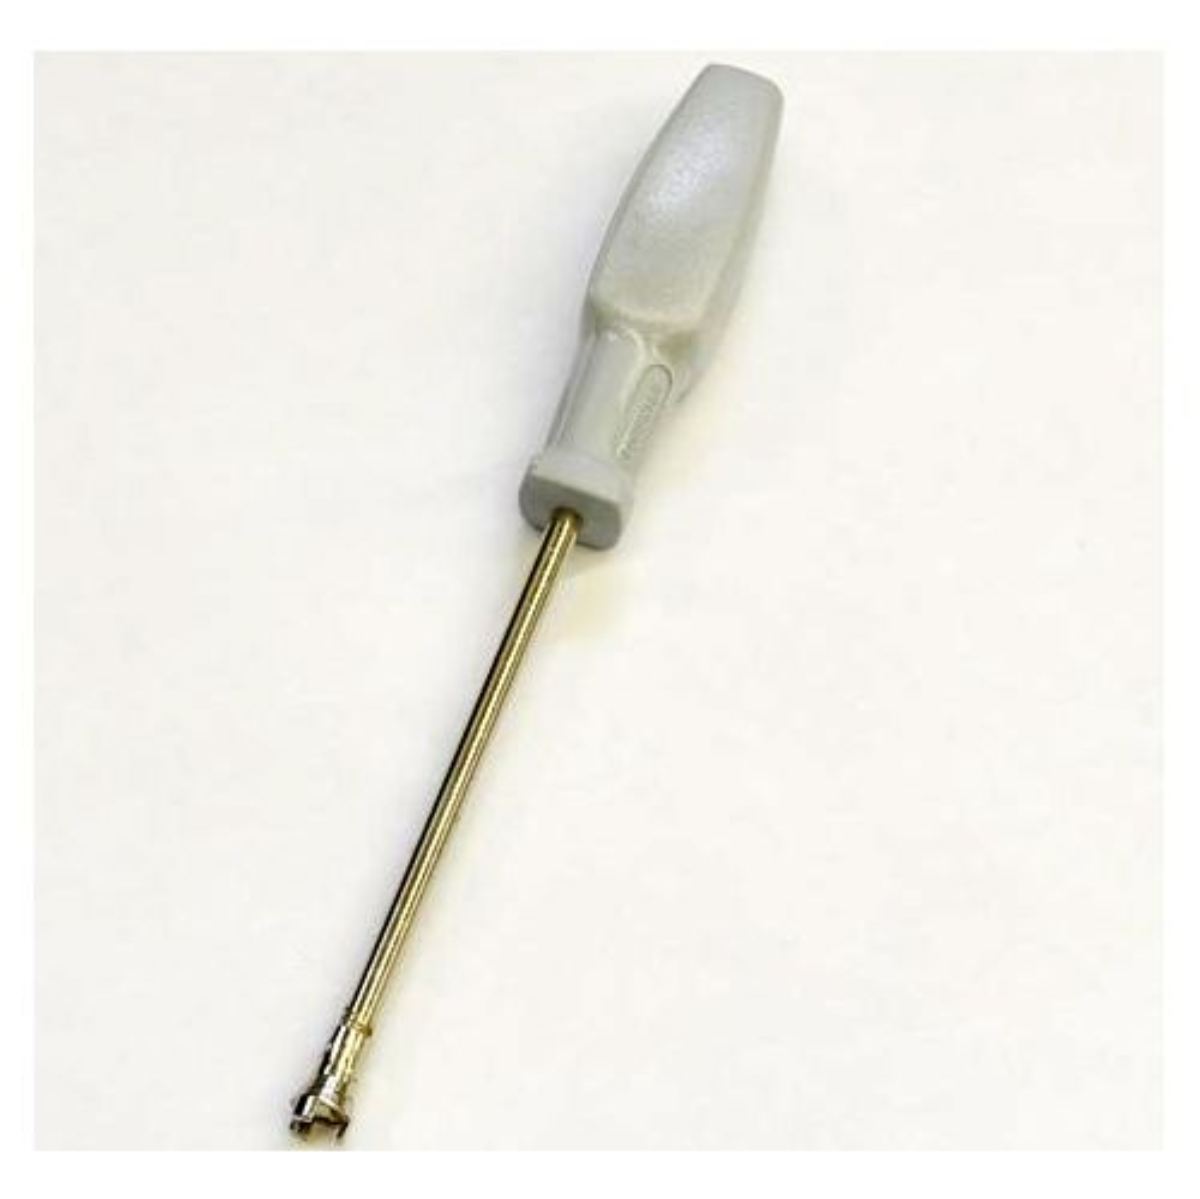 Coughtrie 3 Prong Stair Lighting Screwdriver